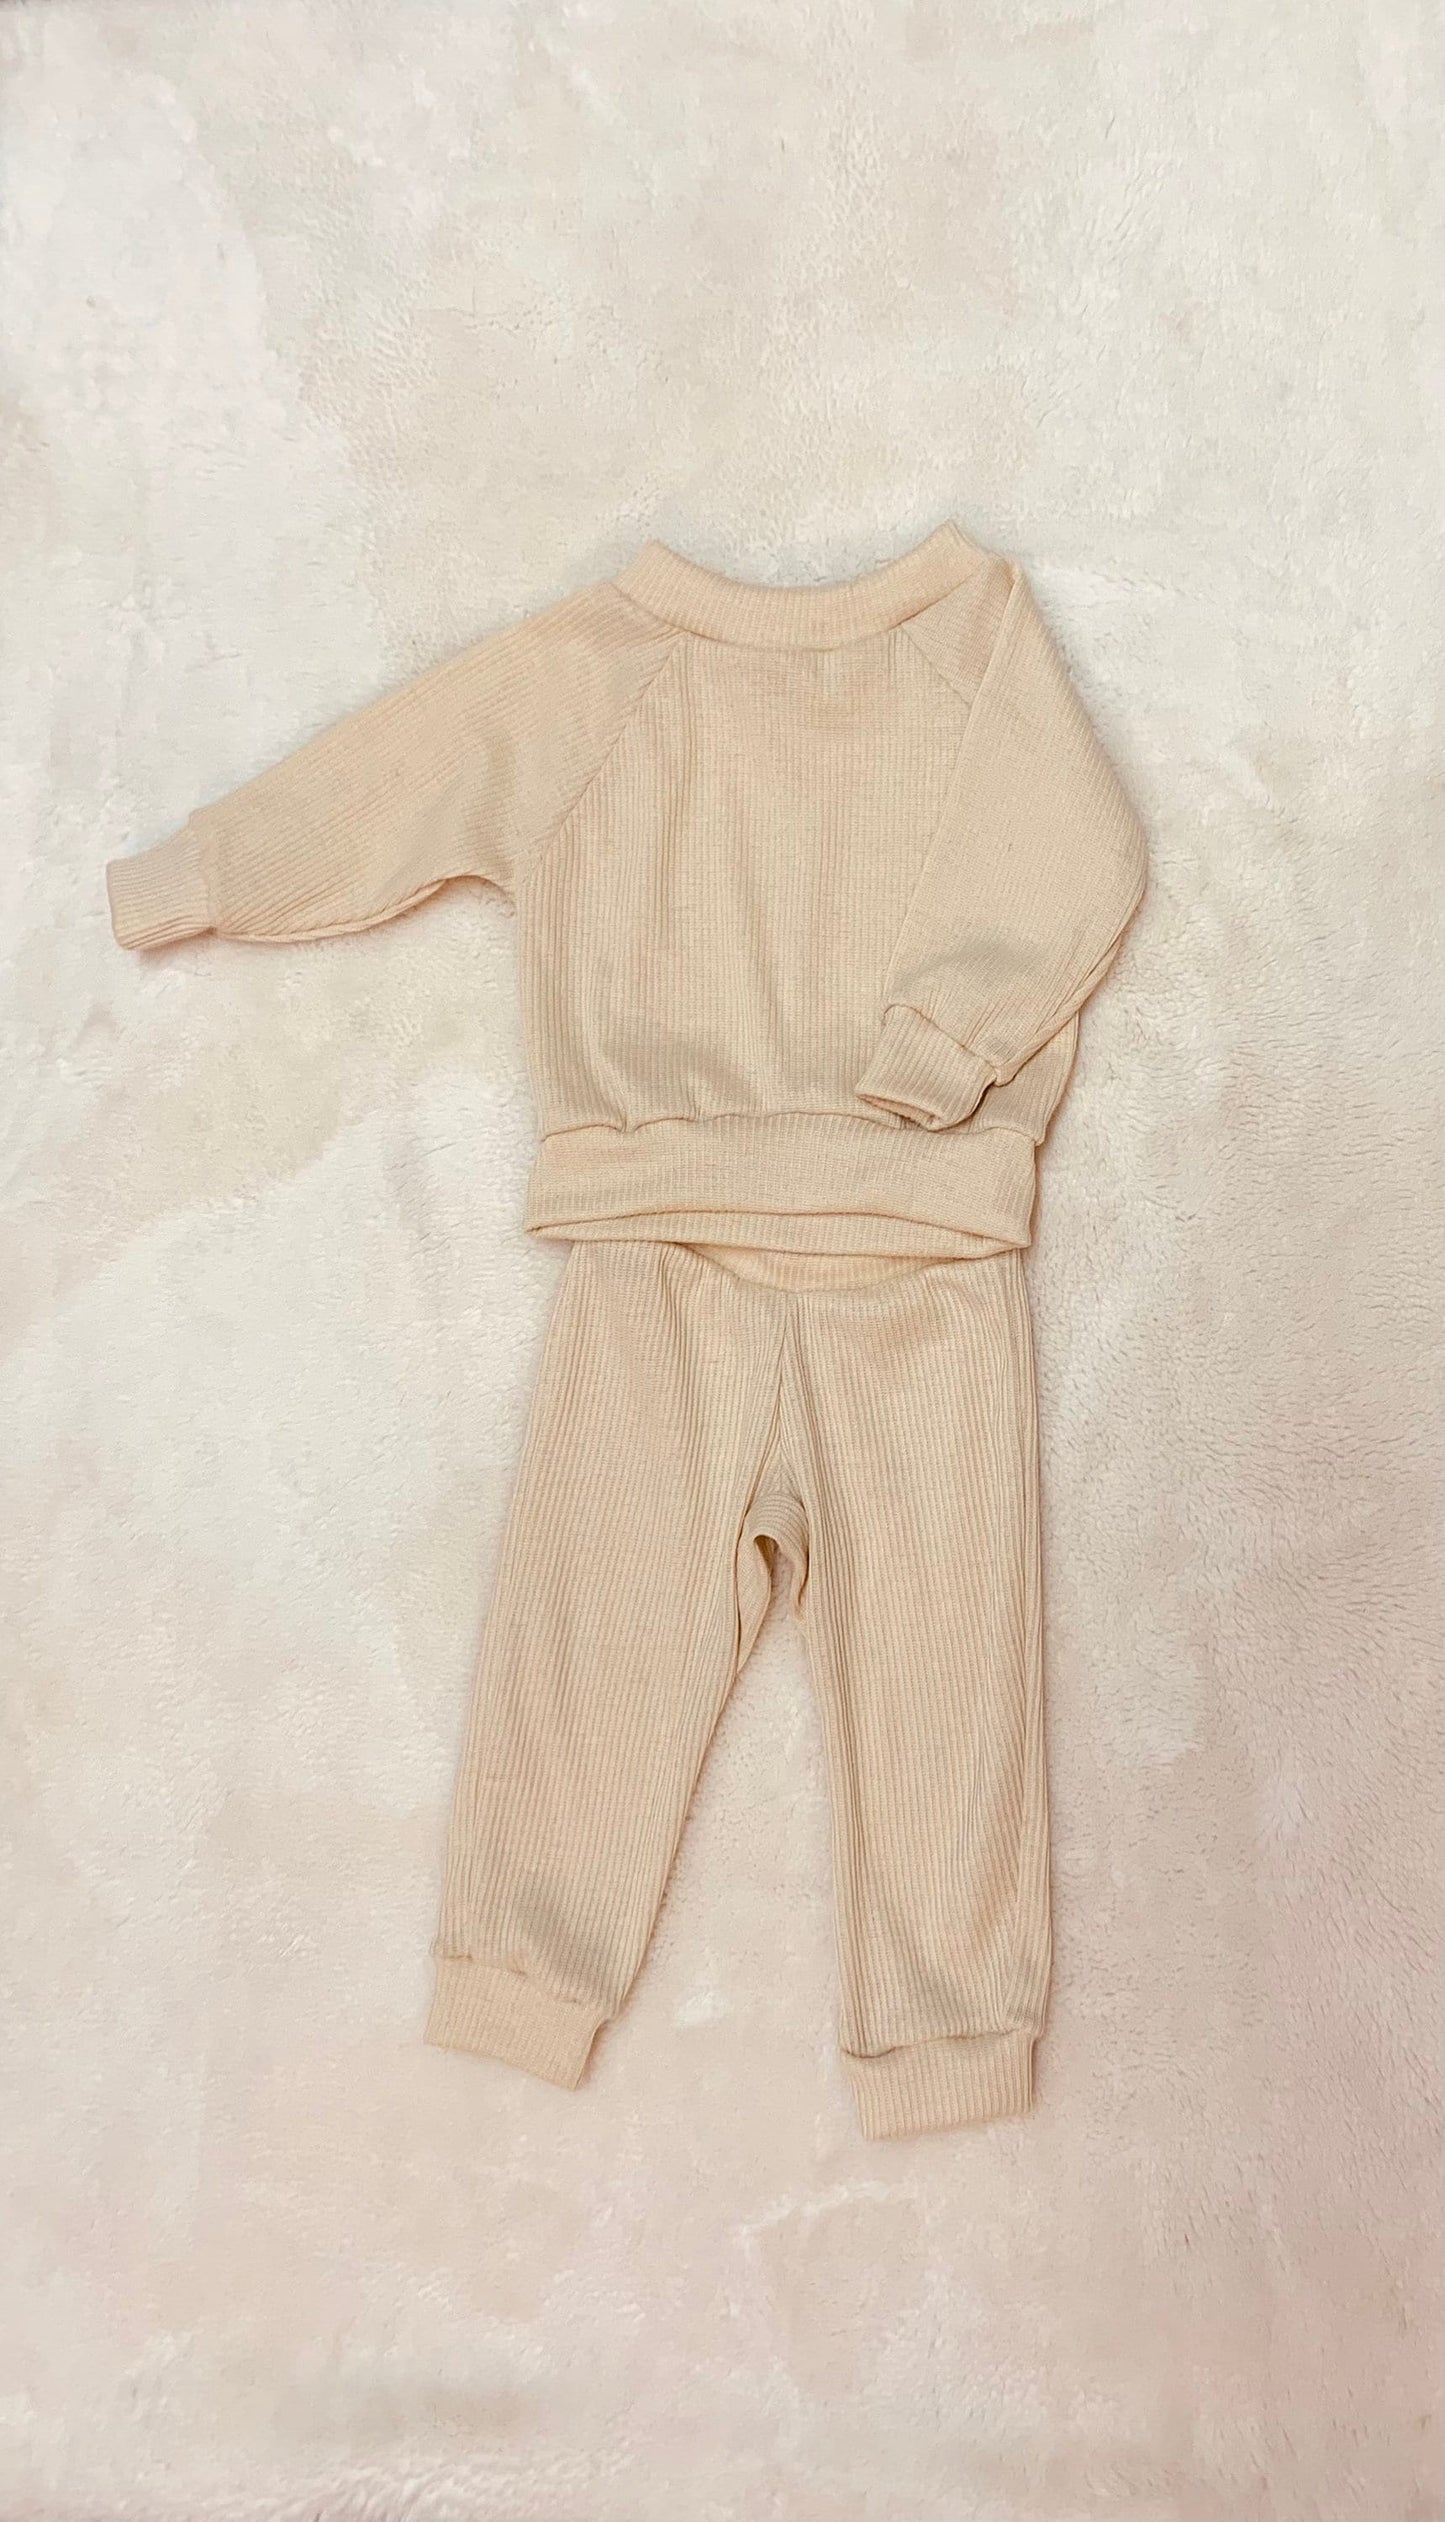 Unisex Loungewear available in more colors|Boys loungewear|Girls Loungewear|Kids Comfortable Clothes|Loungewear Sets|Wholesome Goods Co